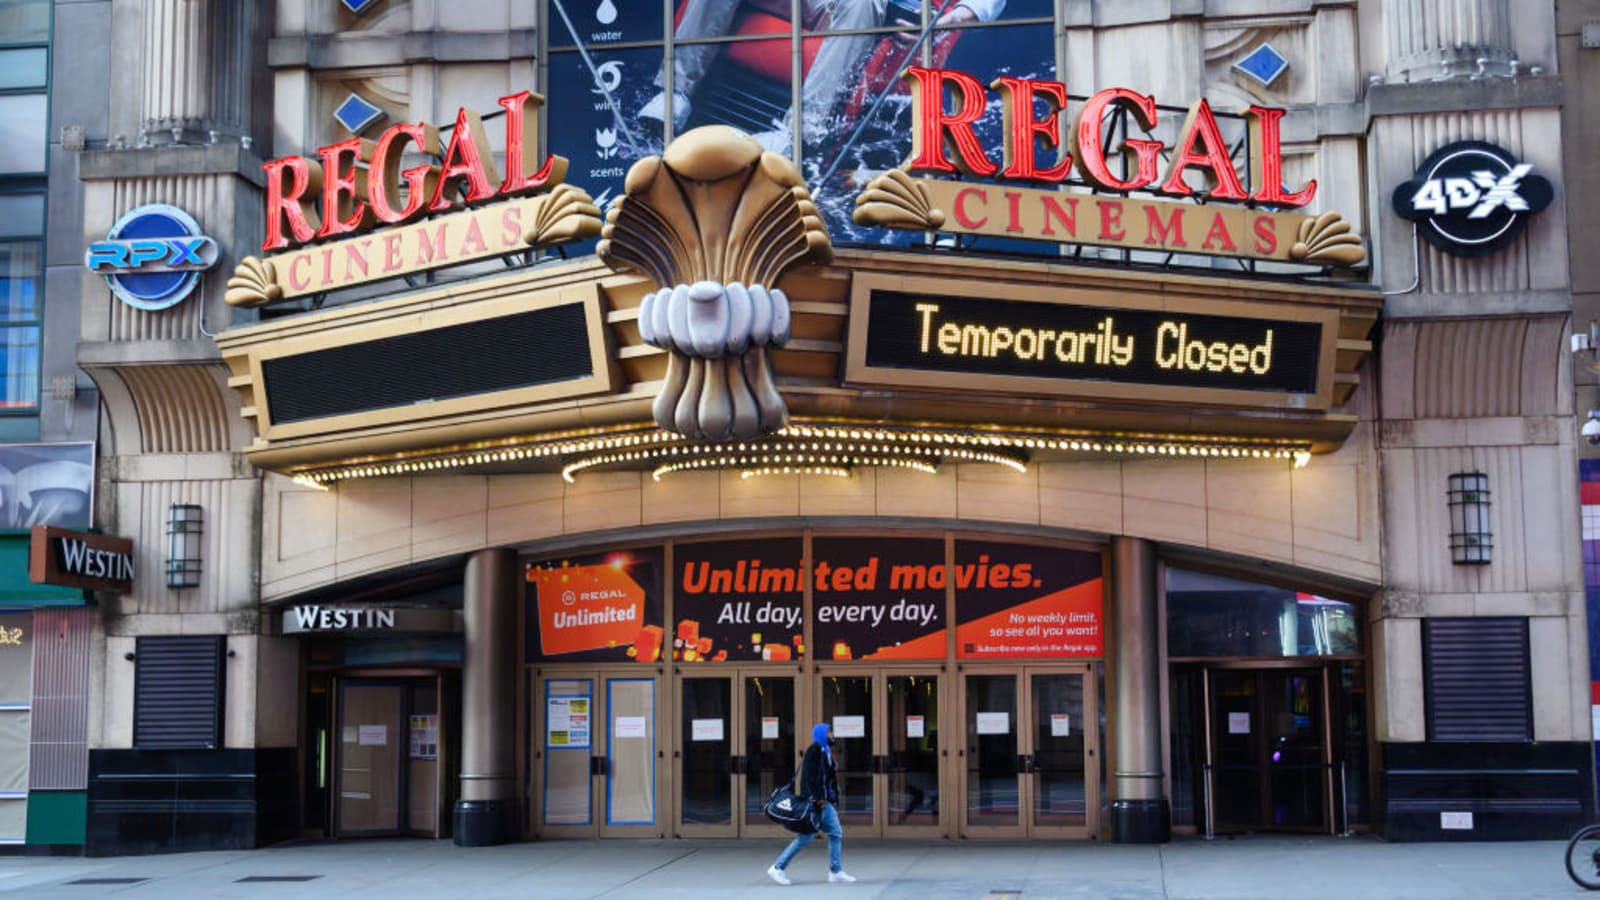 Movie theaters in New York City can open in March at 25% capacity